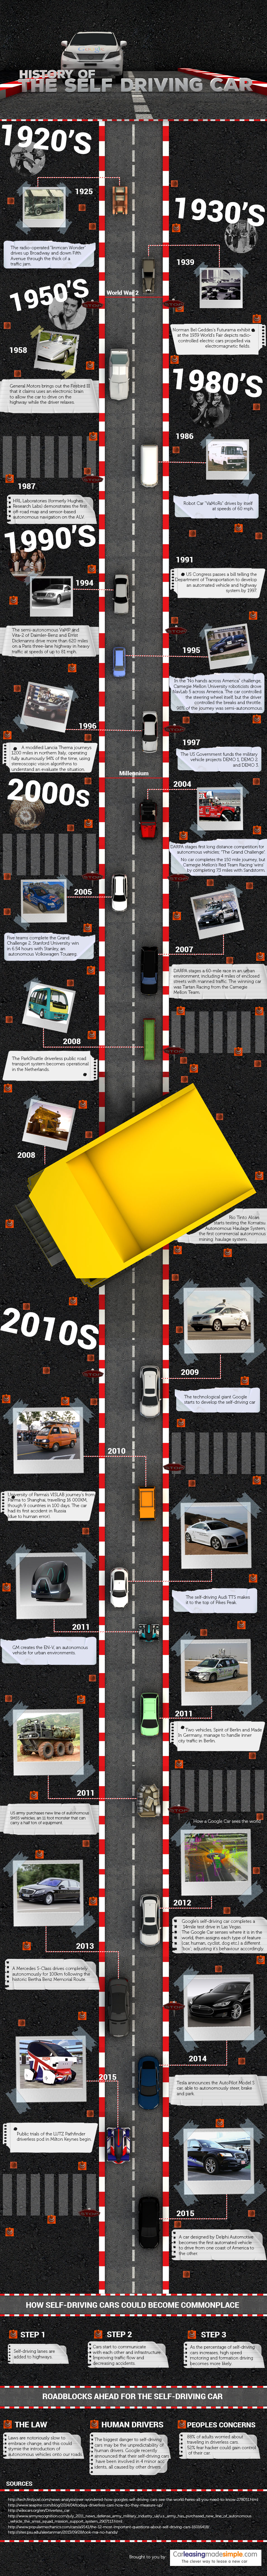 History of the Self Driving Car